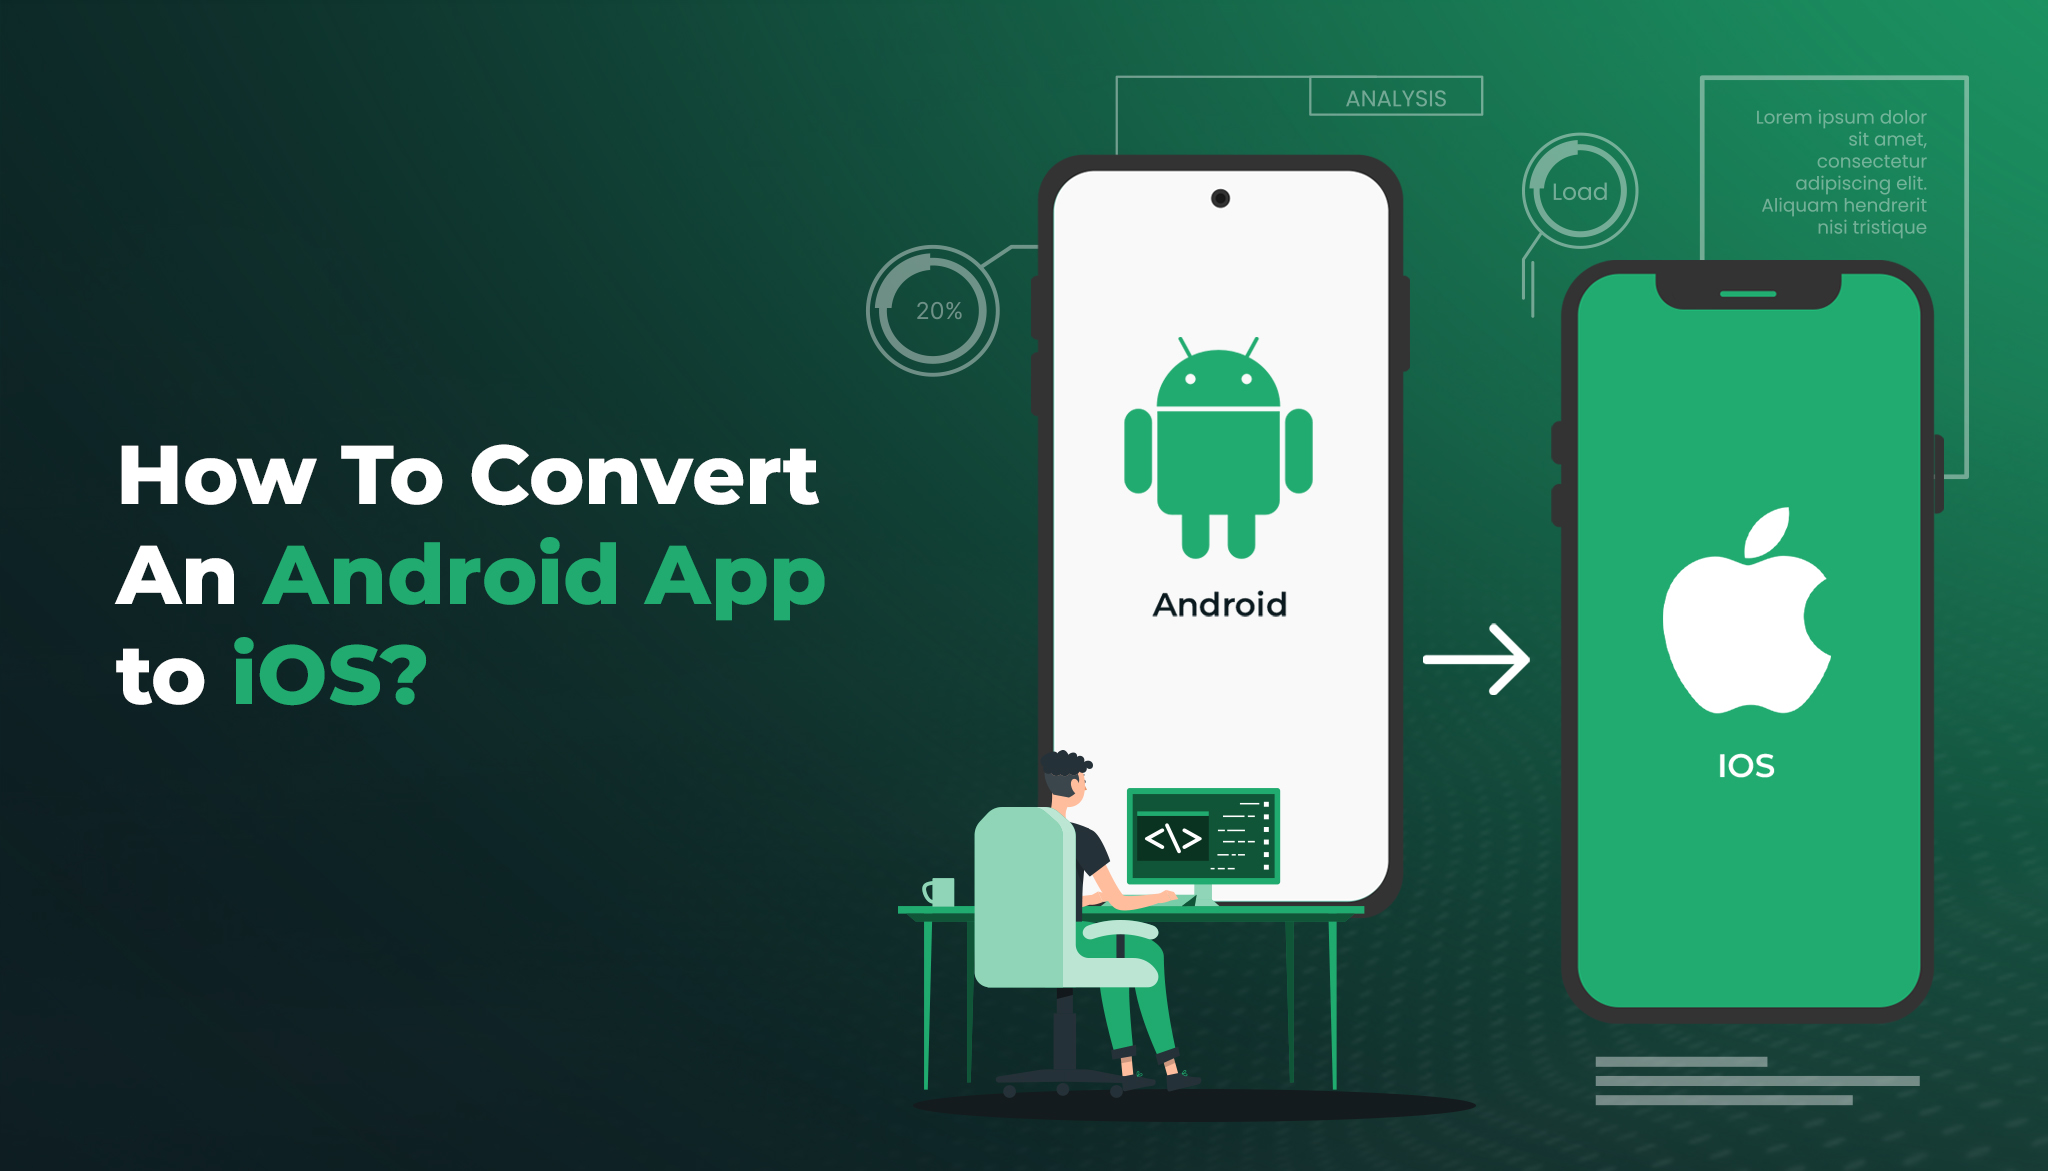 Convert an App from Android to IOS